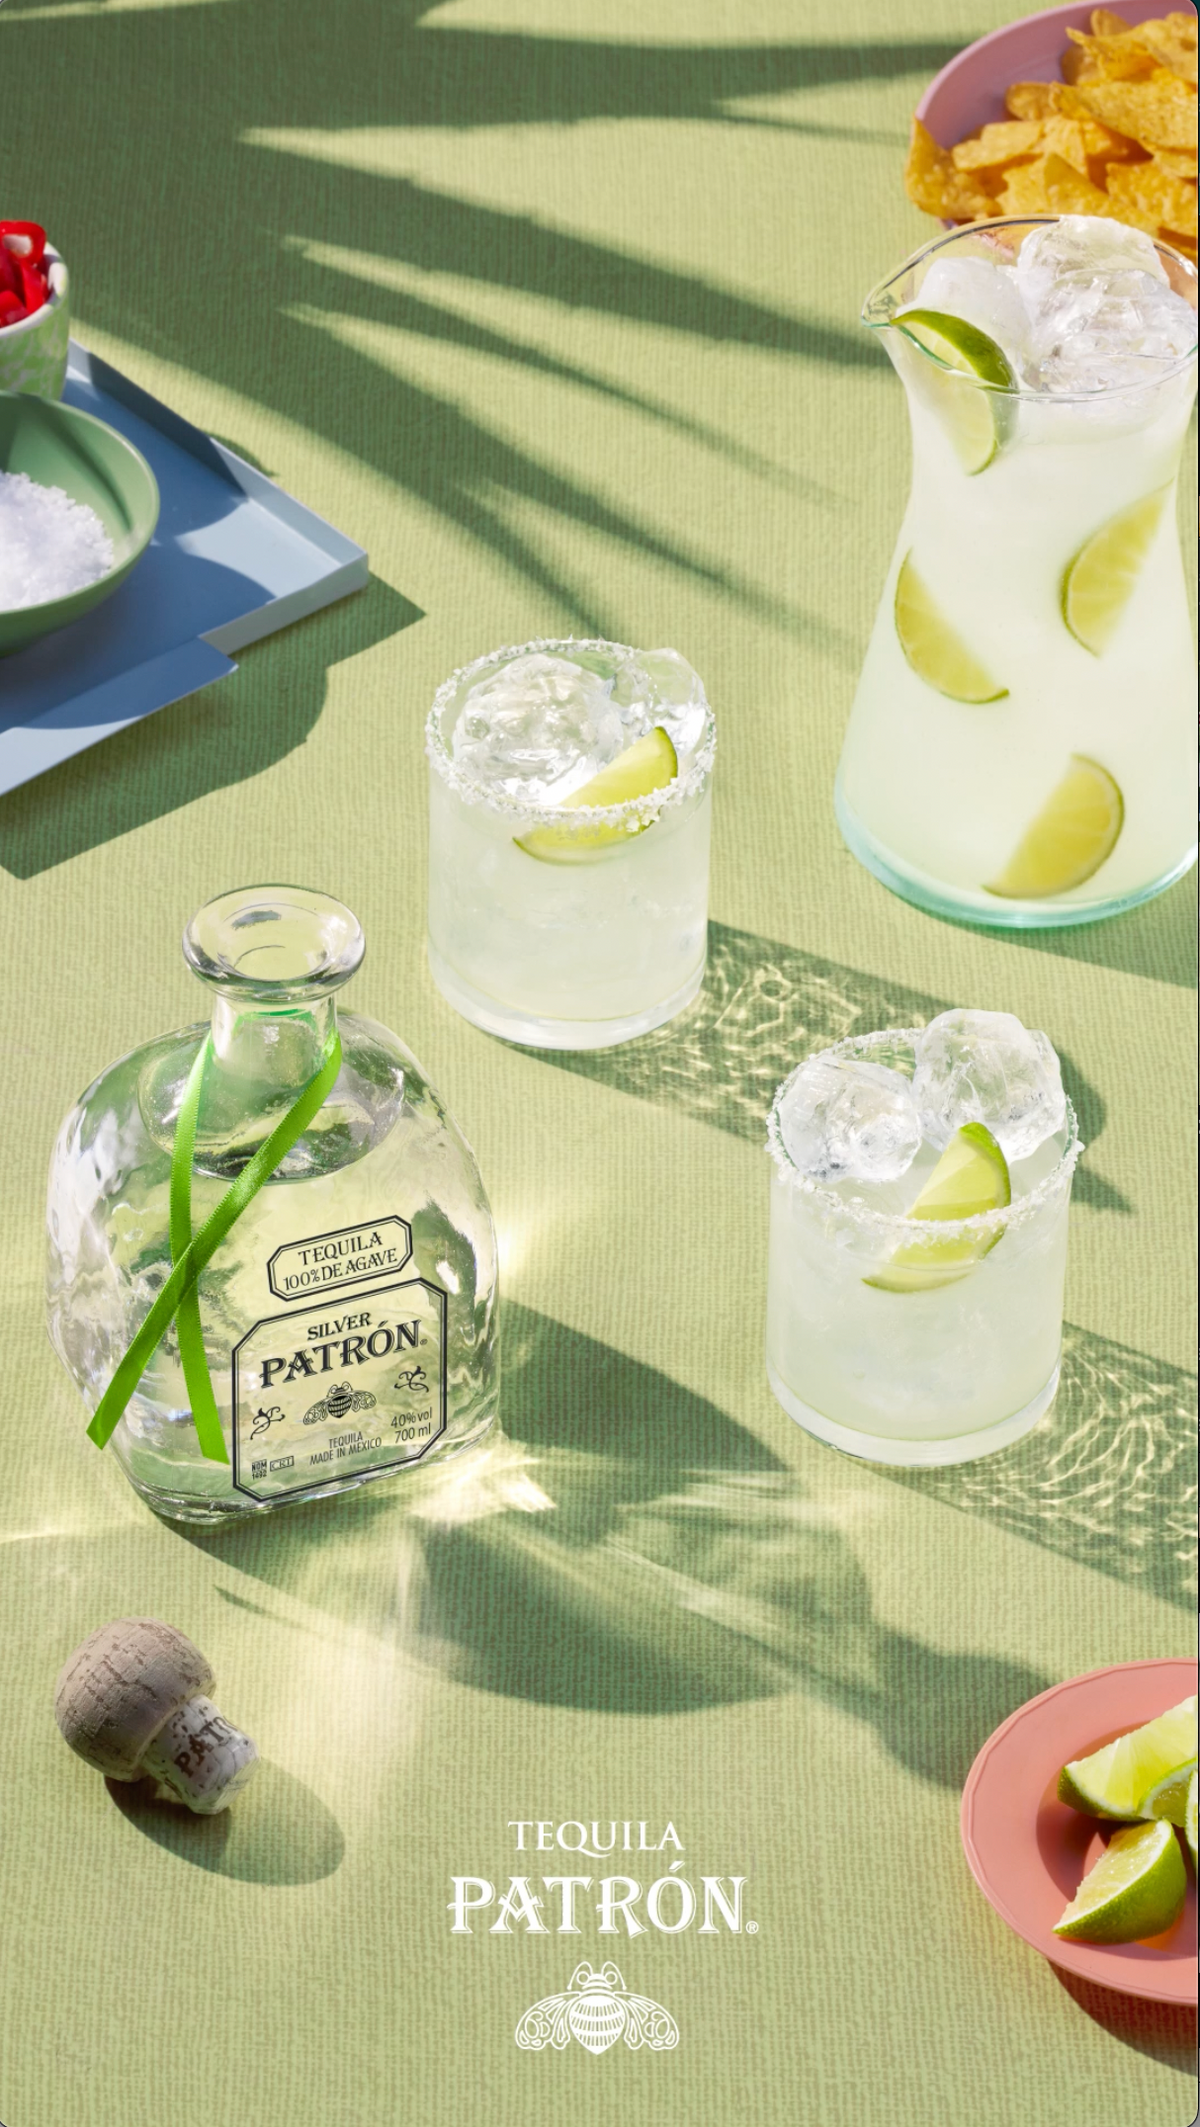 Patron Silver Margaritas in a custom-built Mexican-inspired set photographed by Jason Bailey Studio